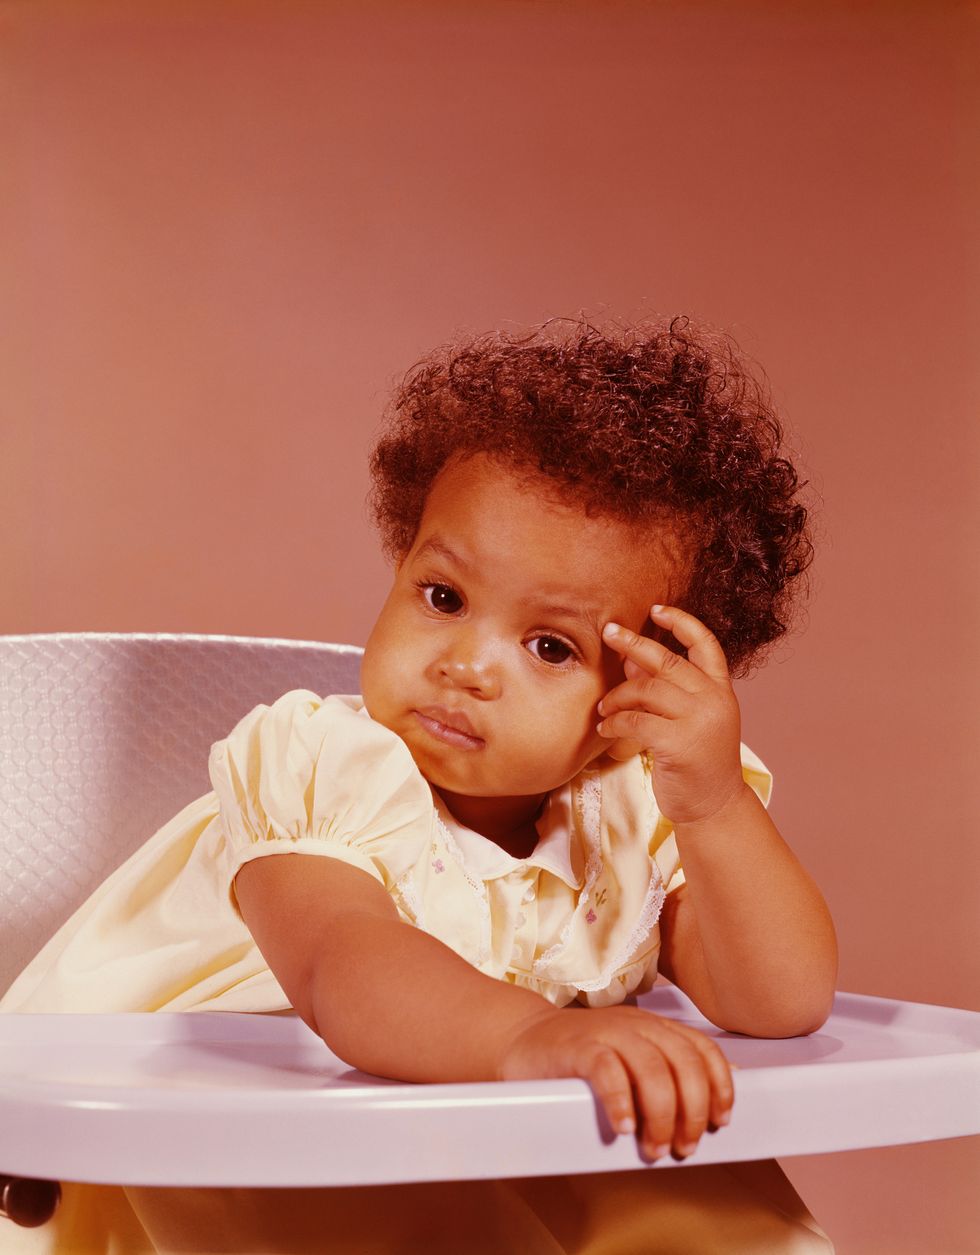 baby, portrait photo by h armstrong robertsretrofilegetty images